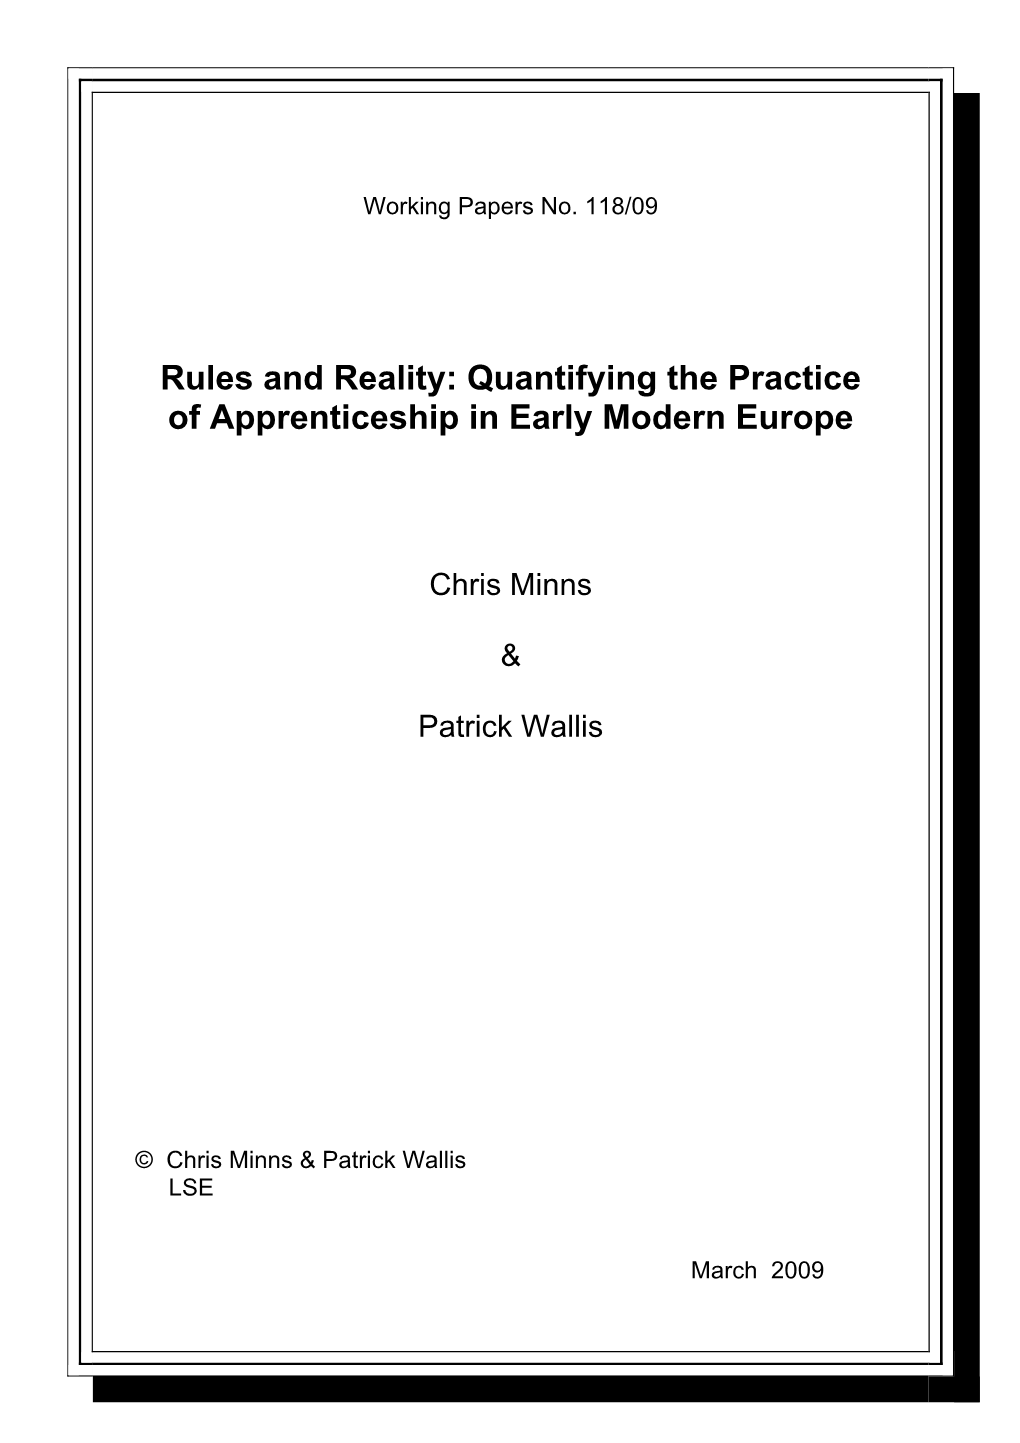 Quantifying the Practice of Apprenticeship in Early Modern Europe